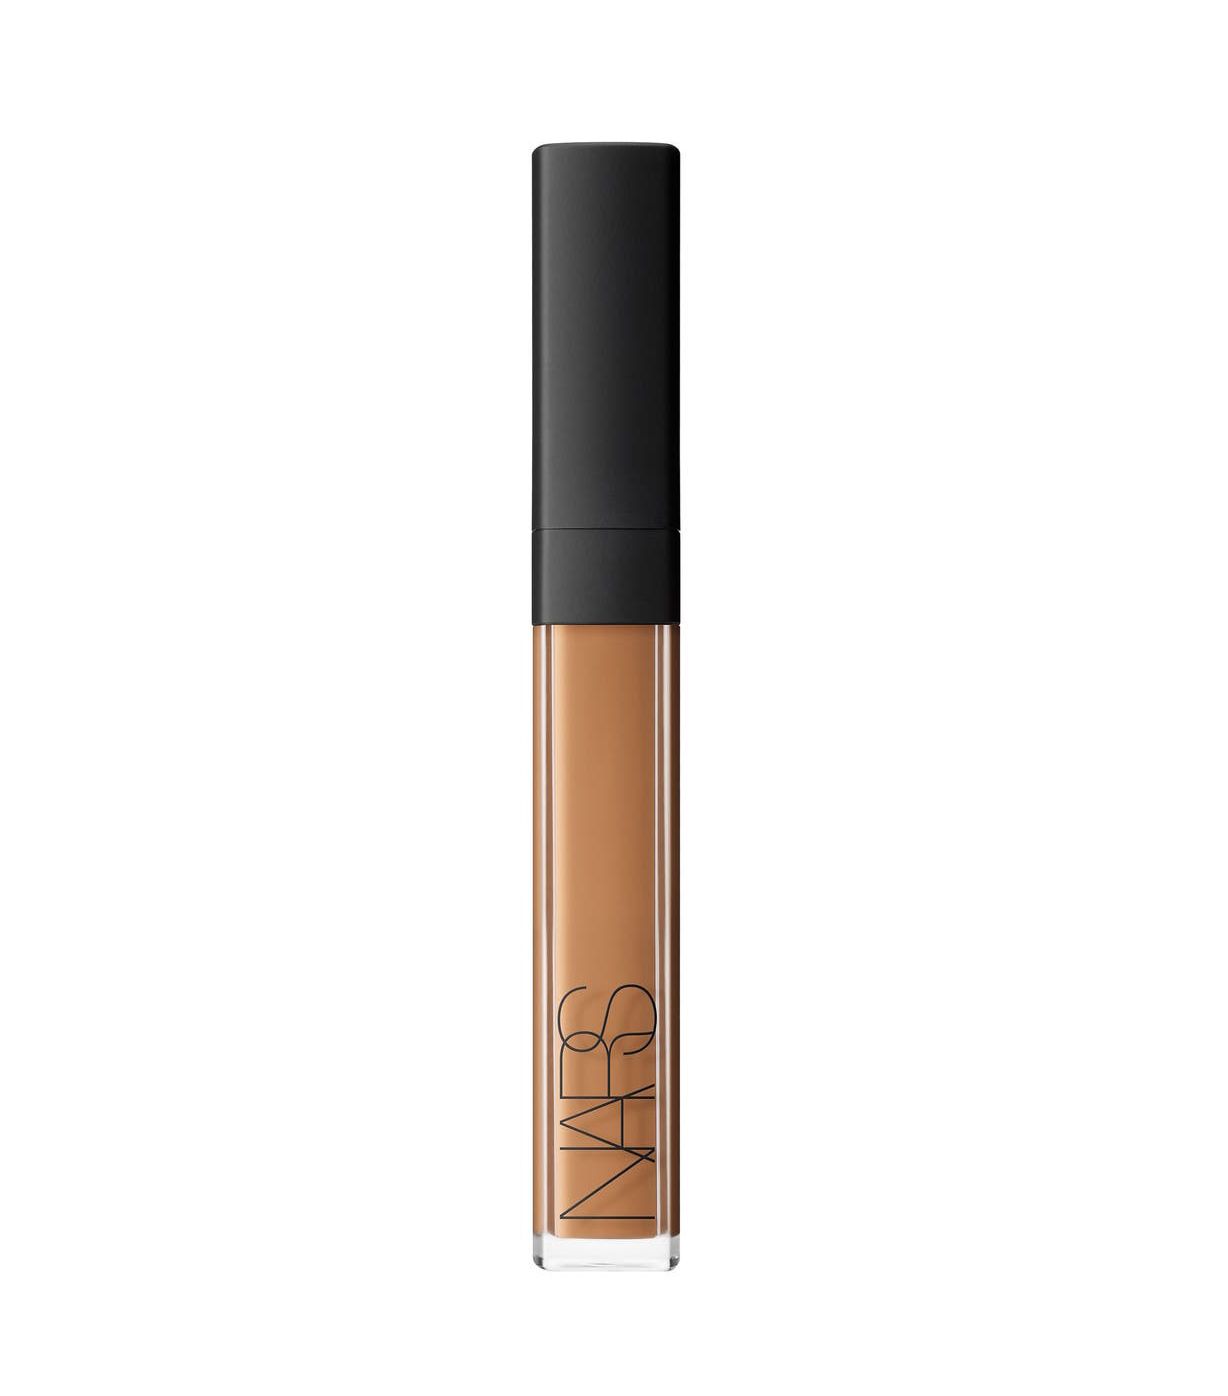 12 Best Concealers for Contouring, According to Experts | Who What Wear